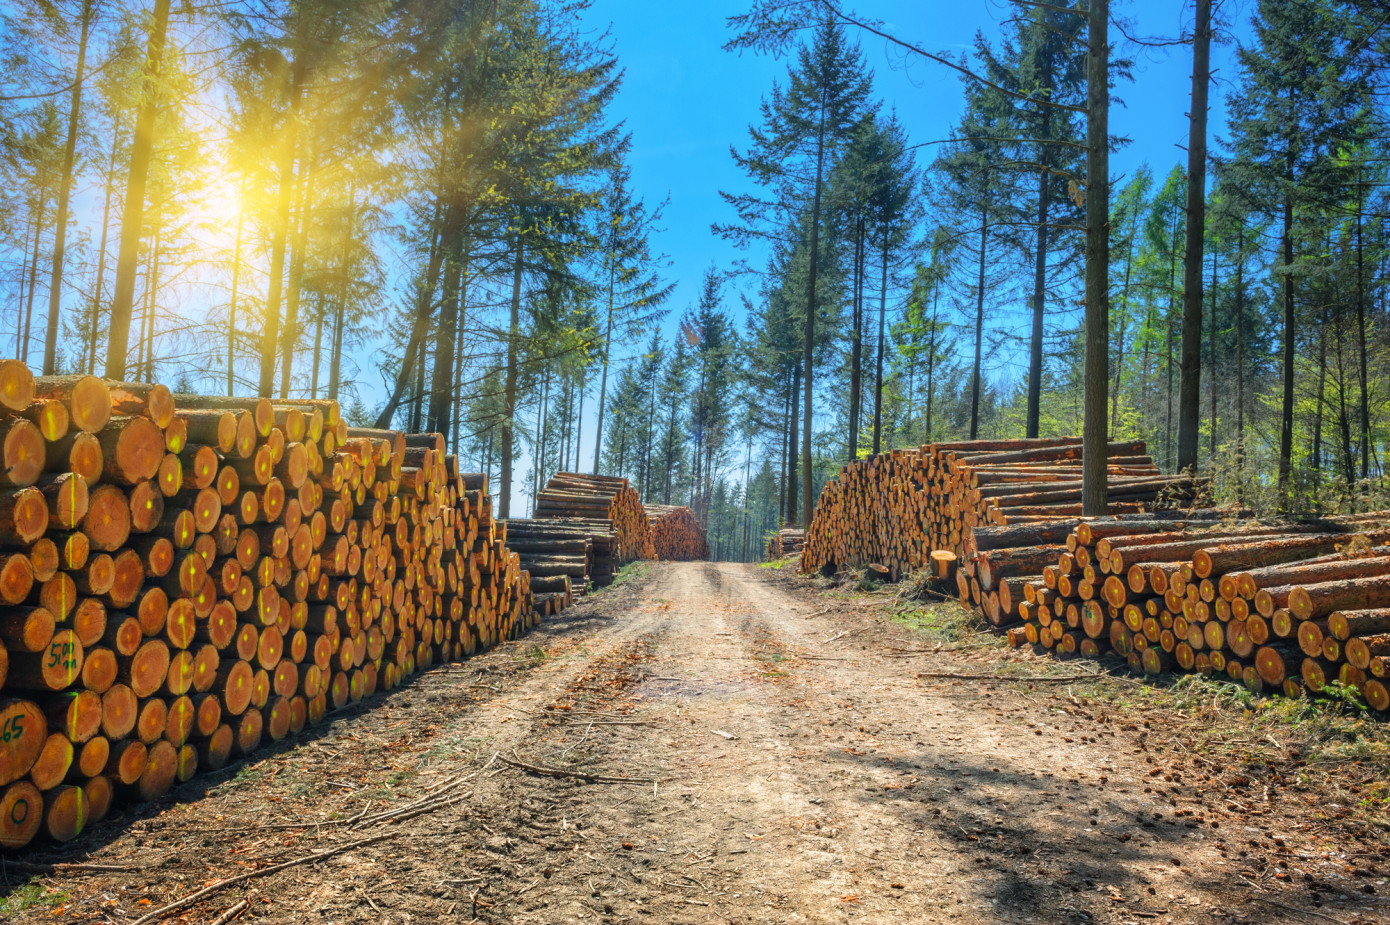 Joe Sanderson: Lumber prices are not going to go back to where they were a year ago